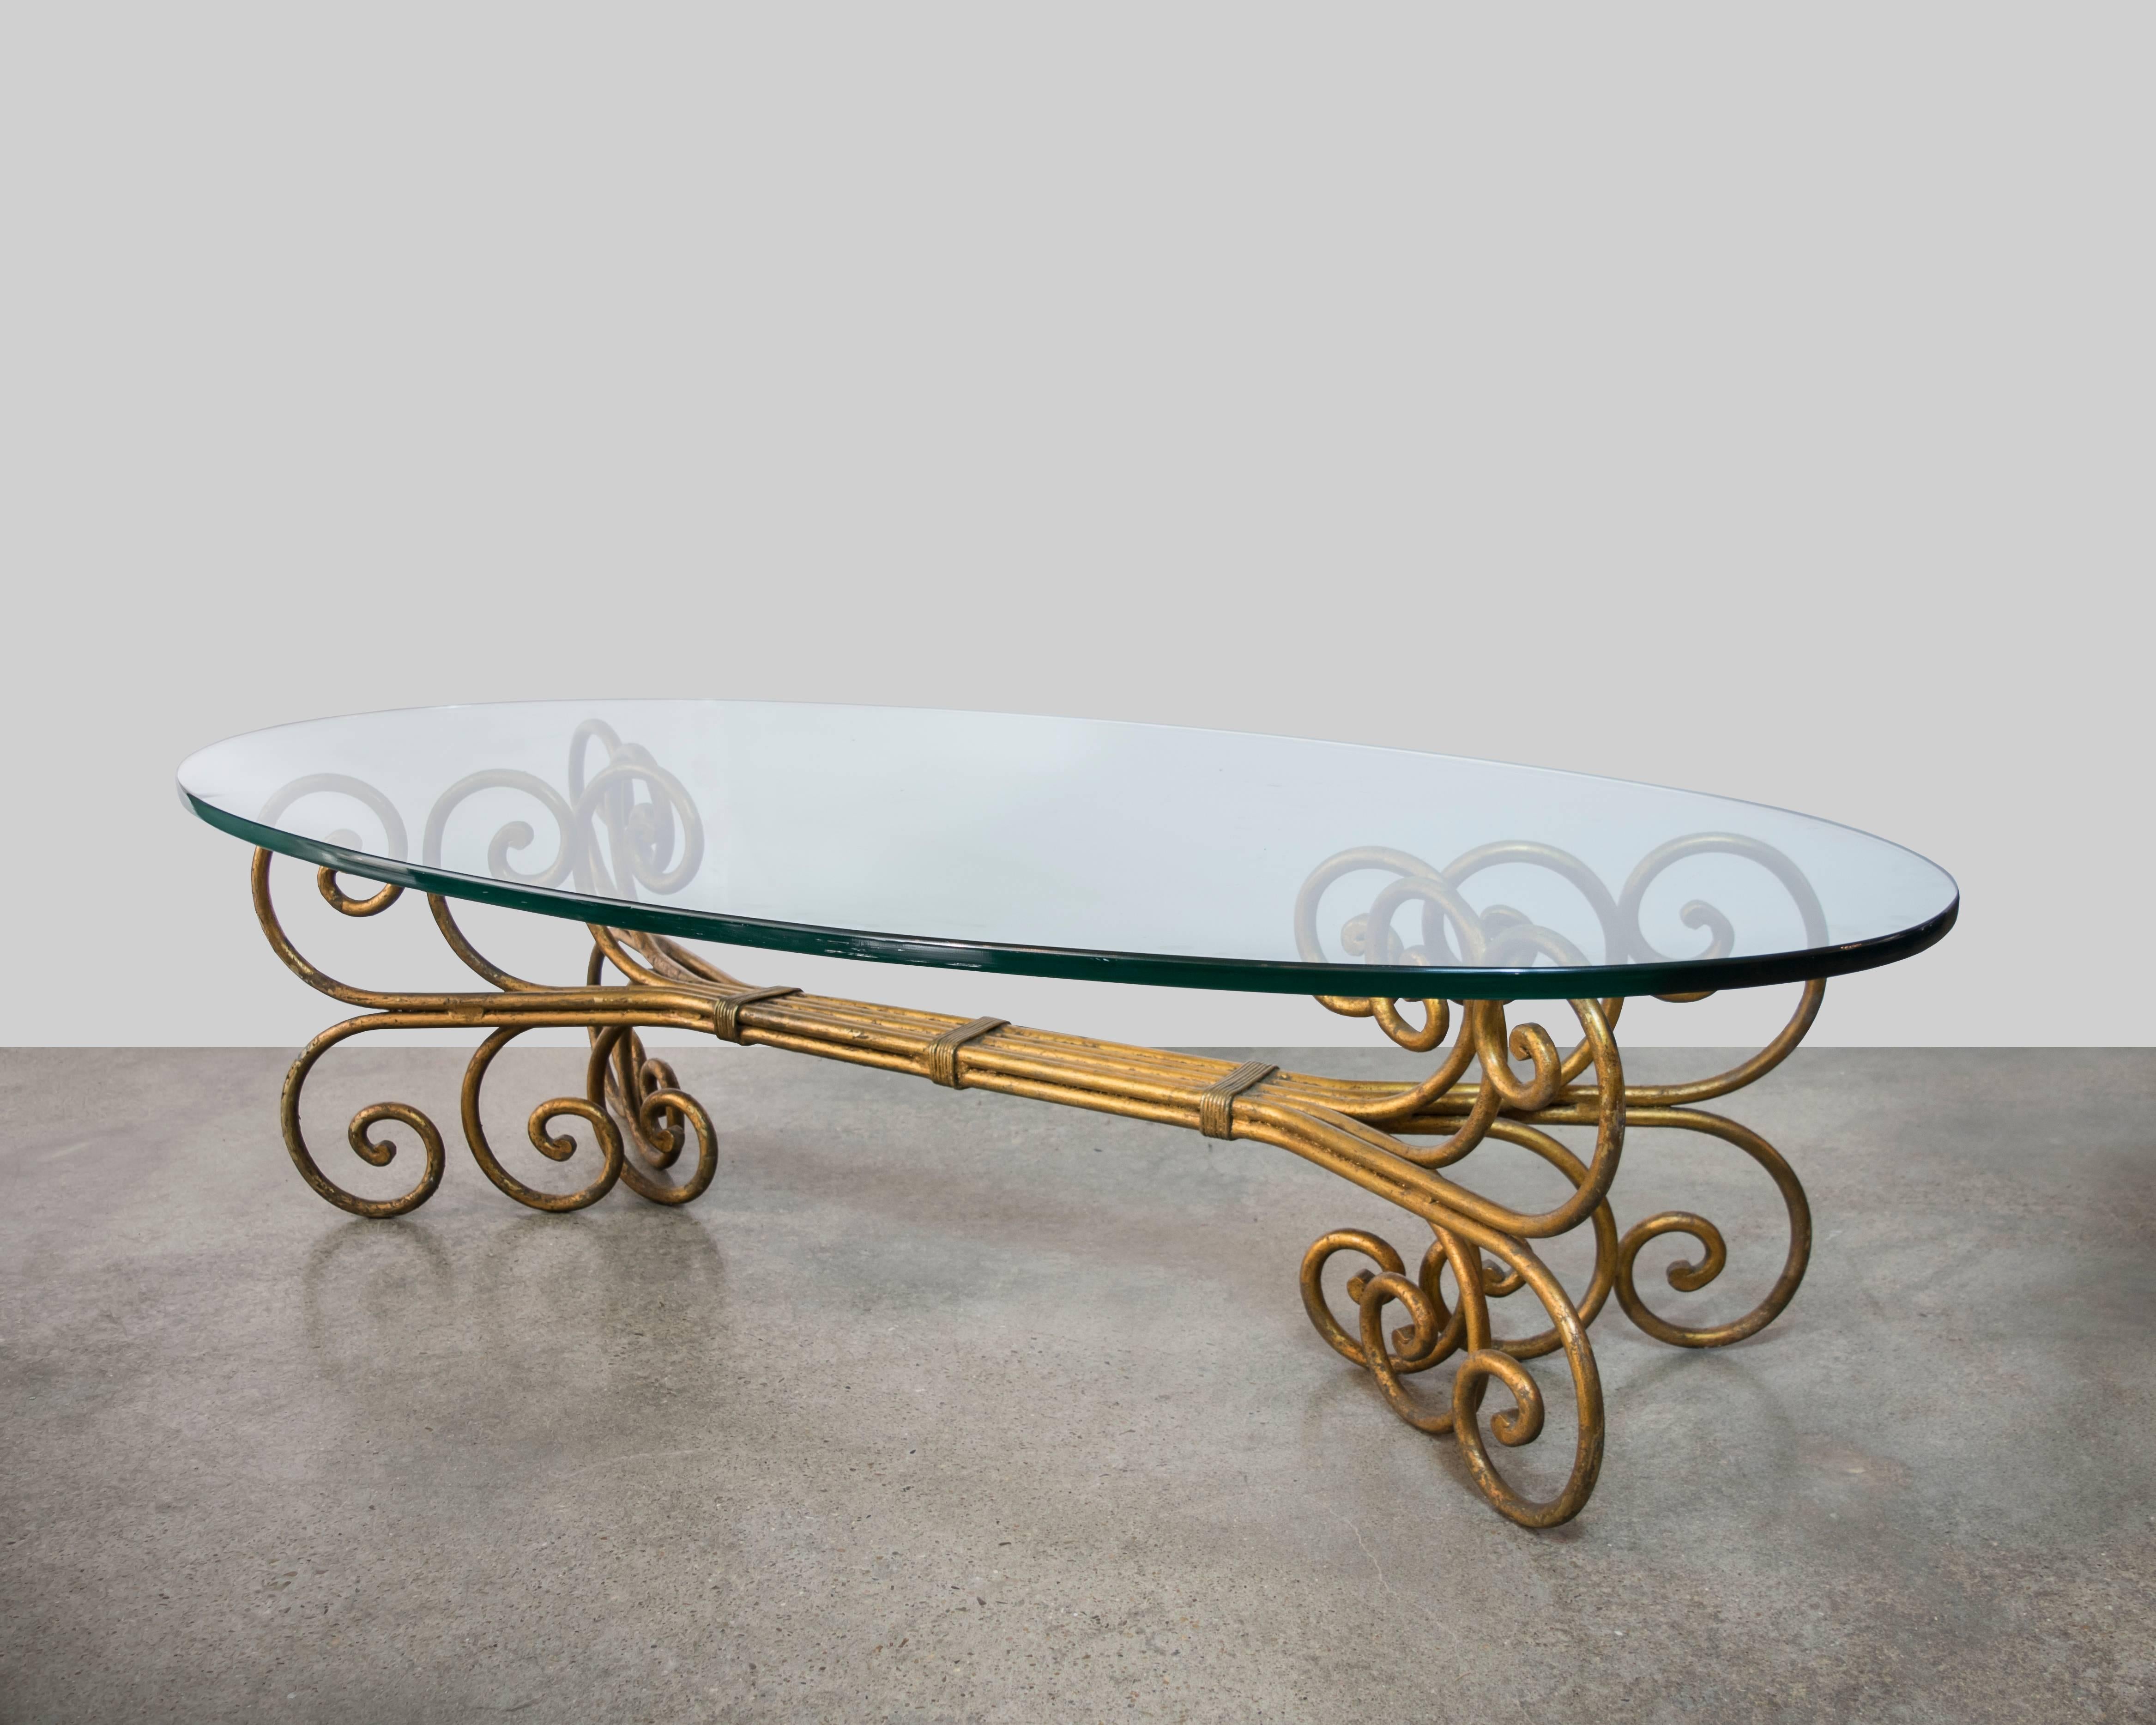 This is a very elegant and highly stylized Hollywood Regency oval shaped coffee table with intricate scroll design.